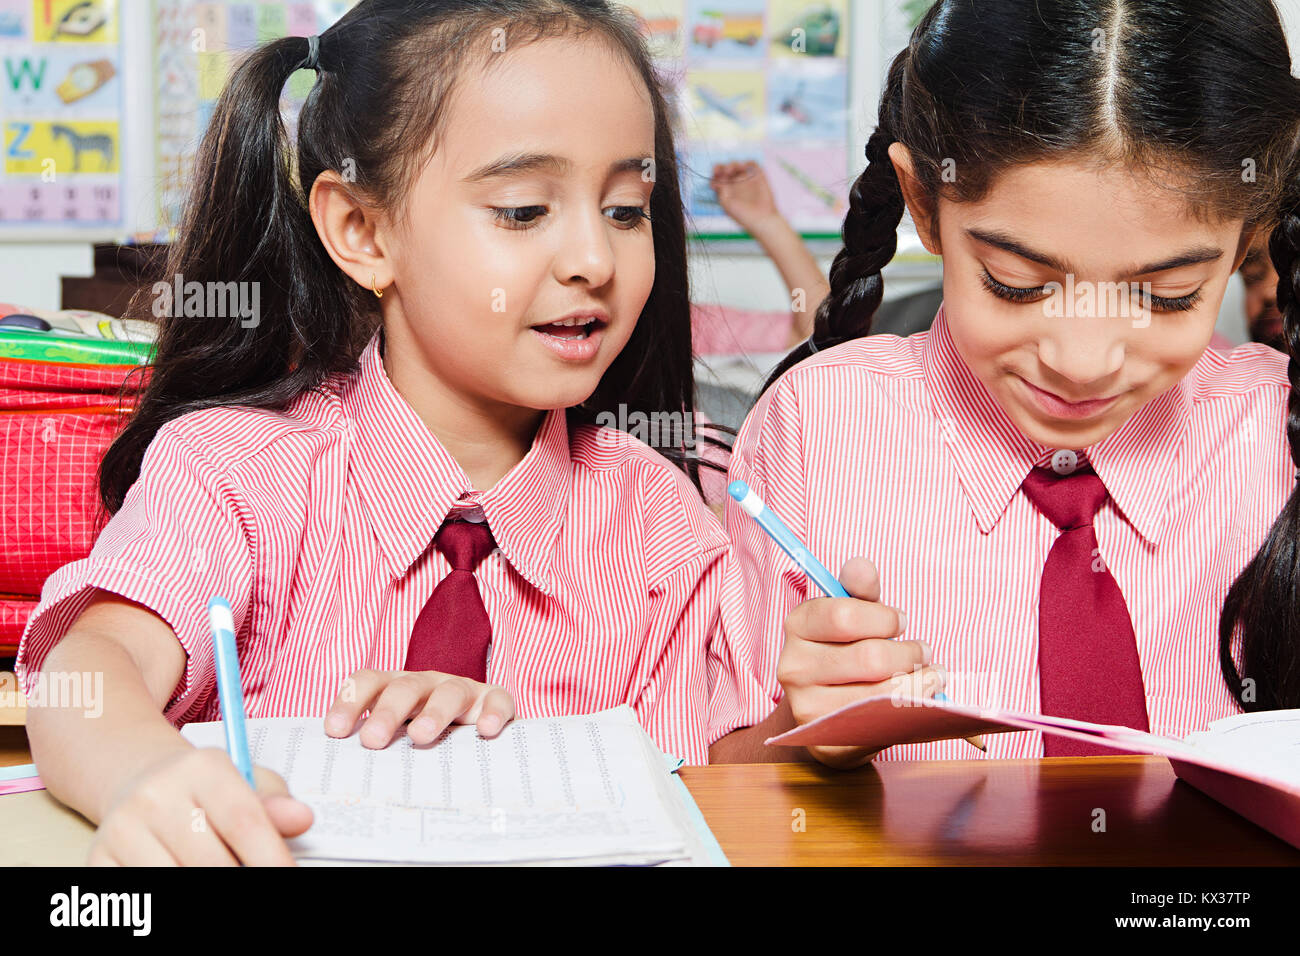 2 Indian School Kids Students Girls Writing Notebook Studying Classroom Stock Photo